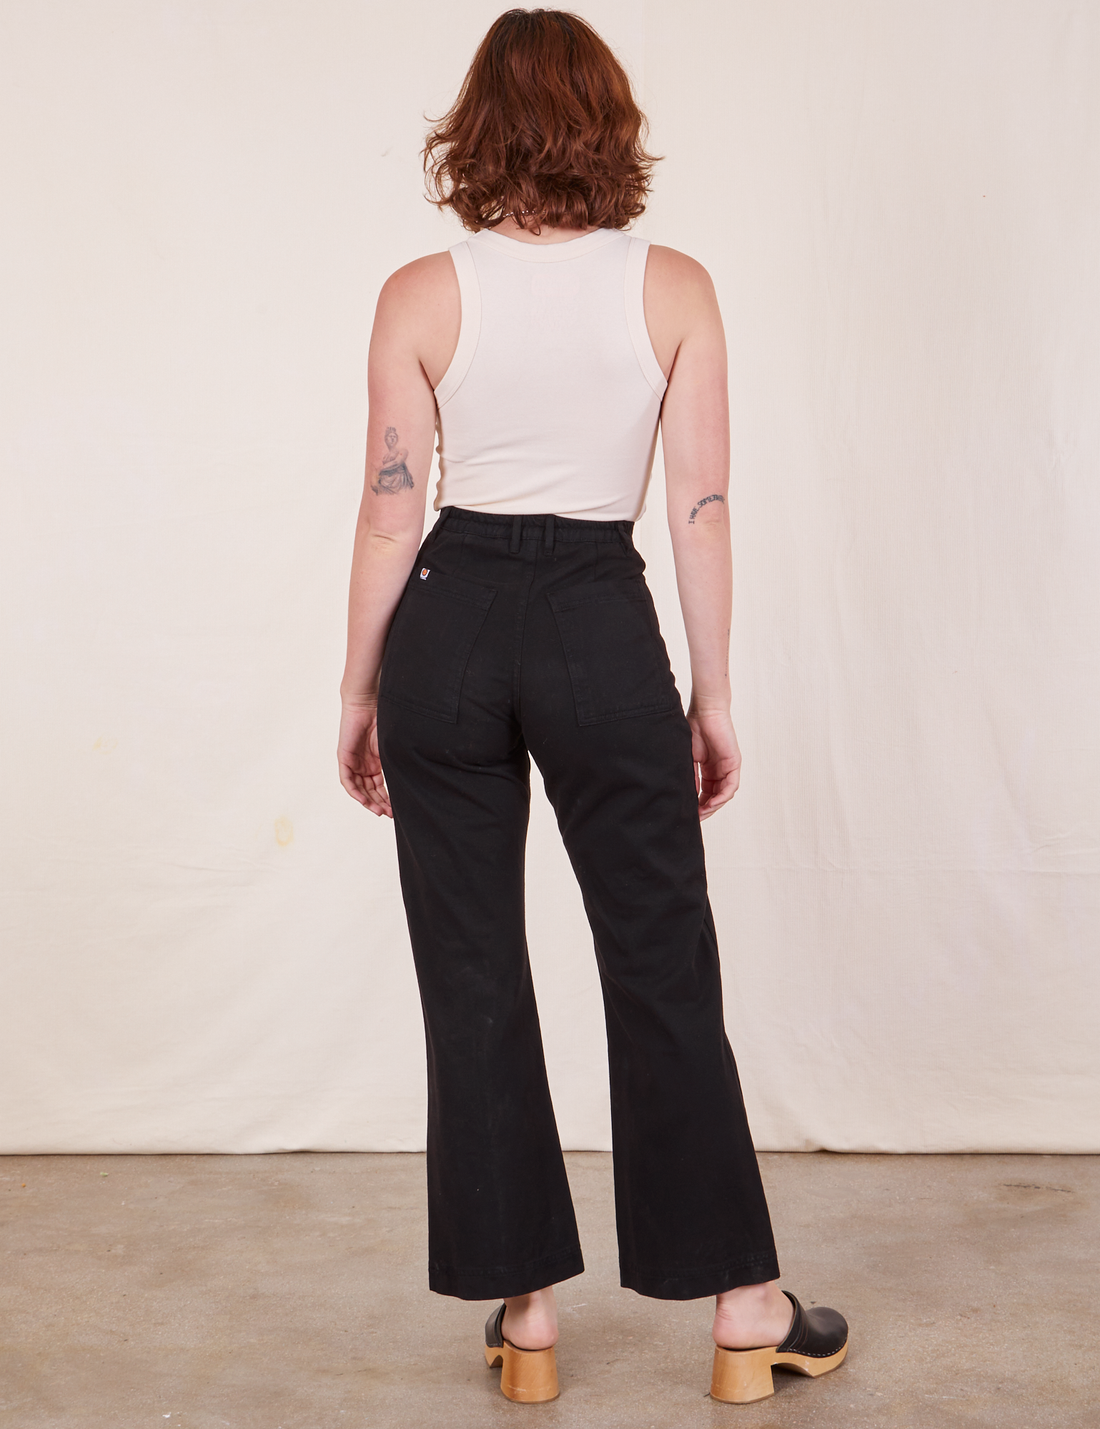 Back view of Western Pants in Basic Black and vintage off-white Tank Top worn by Alex